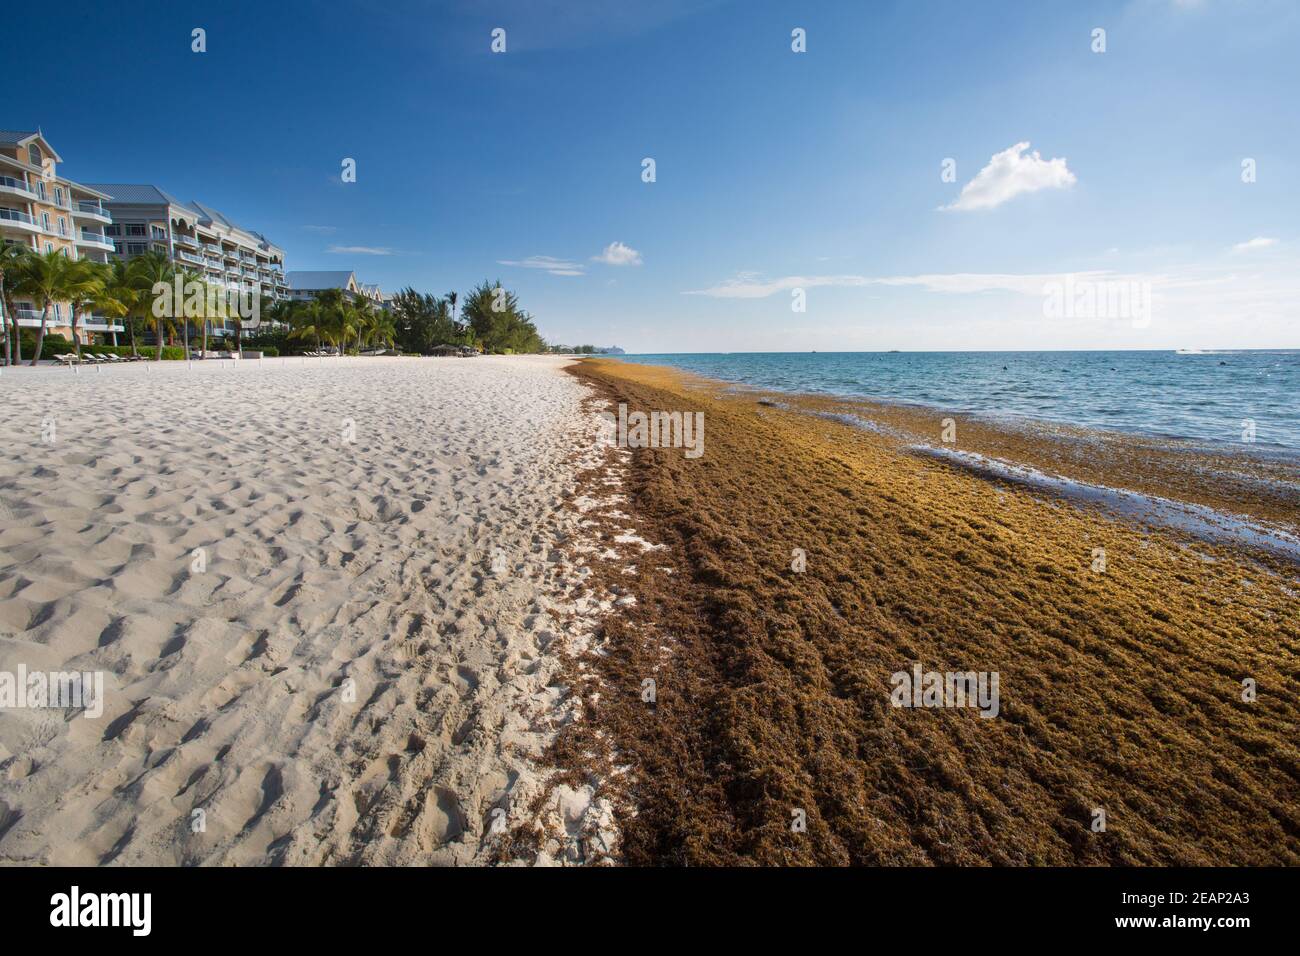 Grand cayman islands damage hires stock photography and images Alamy